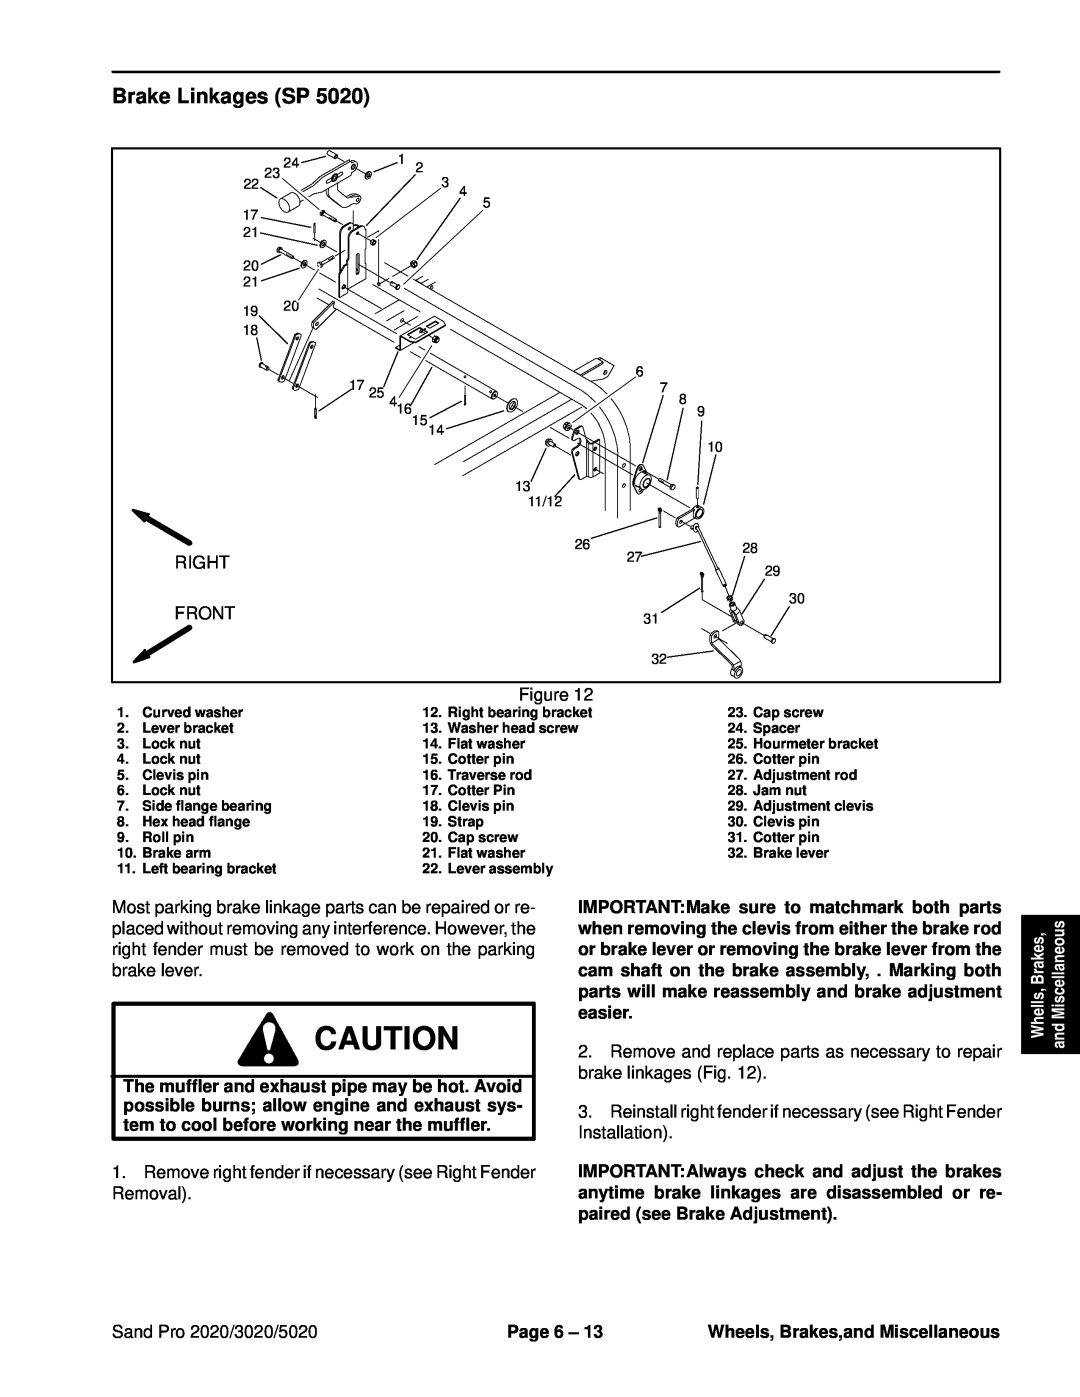 Toro service manual Brake Linkages SP, Right, Front, Sand Pro 2020/3020/5020, Page 6, Wheels, Brakes,and Miscellaneous 